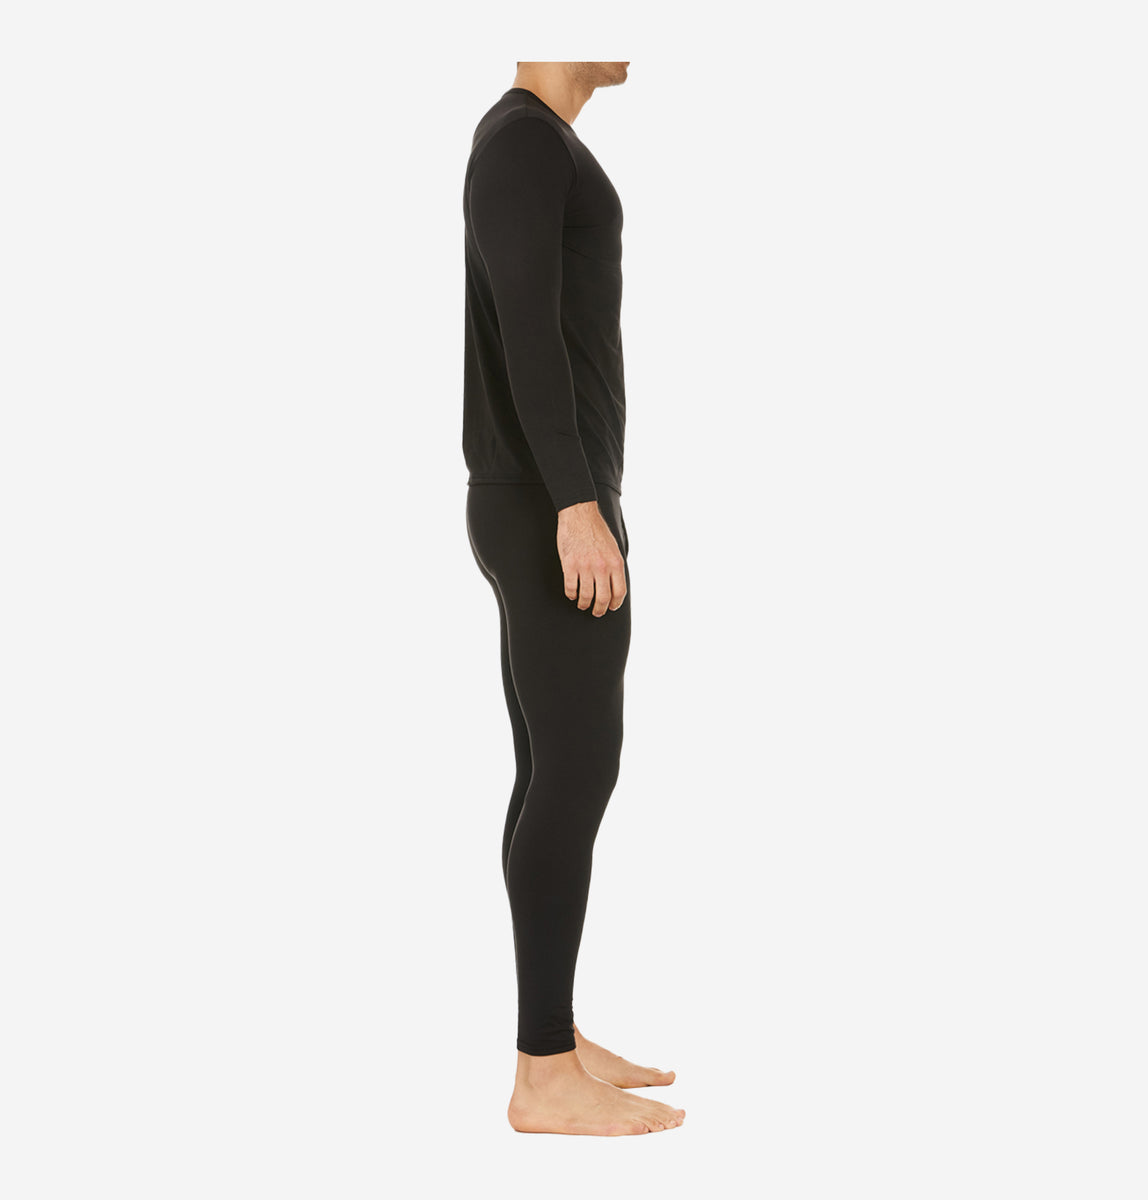 Winter Thermajane Thermal Underwear Set Set For Men And Women Fleece Long  Johns For Warmth In Cold Weather, Sizes L 6XL From Xiguanchu, $22.13